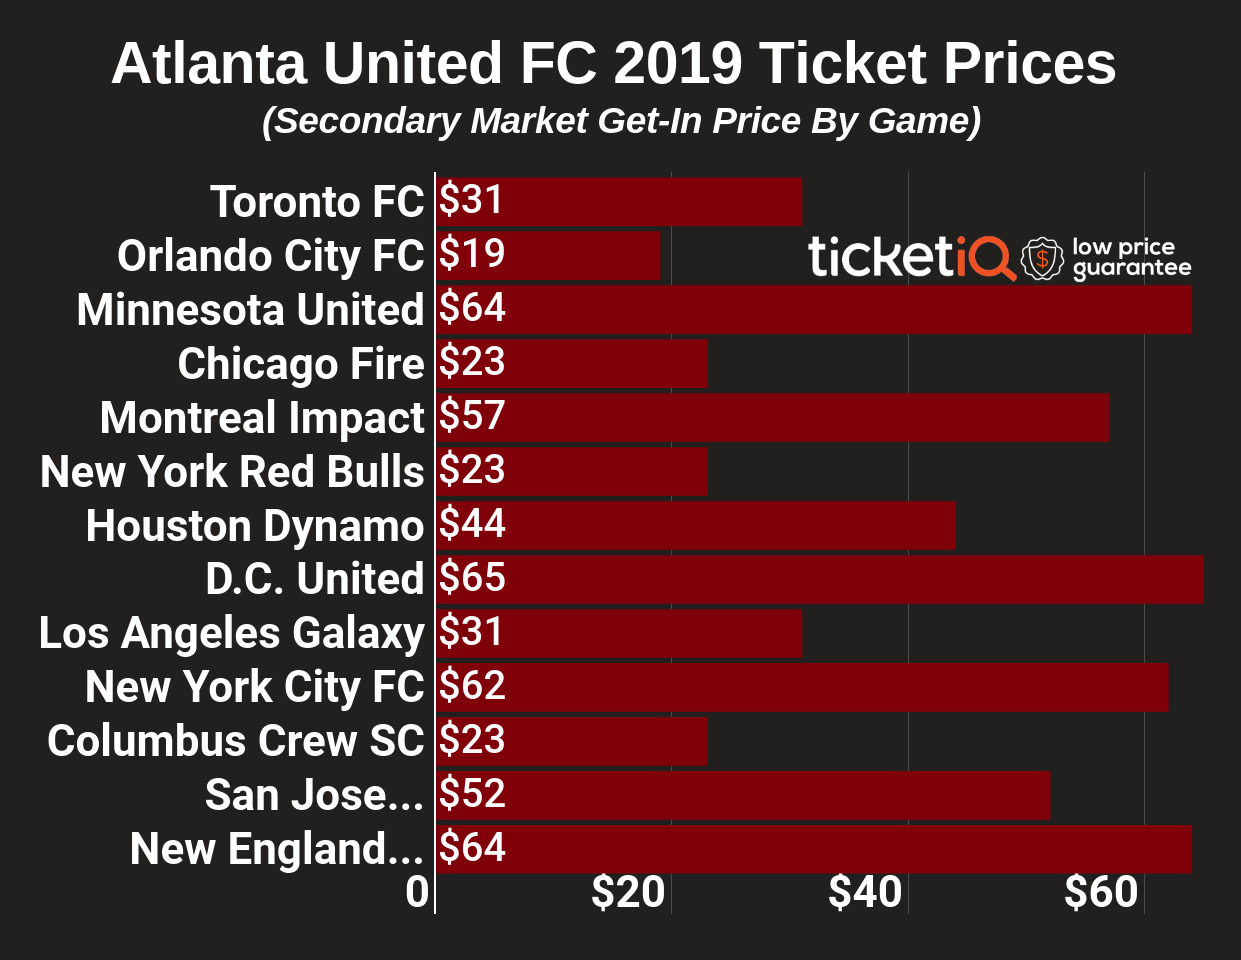 Where to Find Cheapest Atlanta United FC Ticket Prices For 2019 Schedule